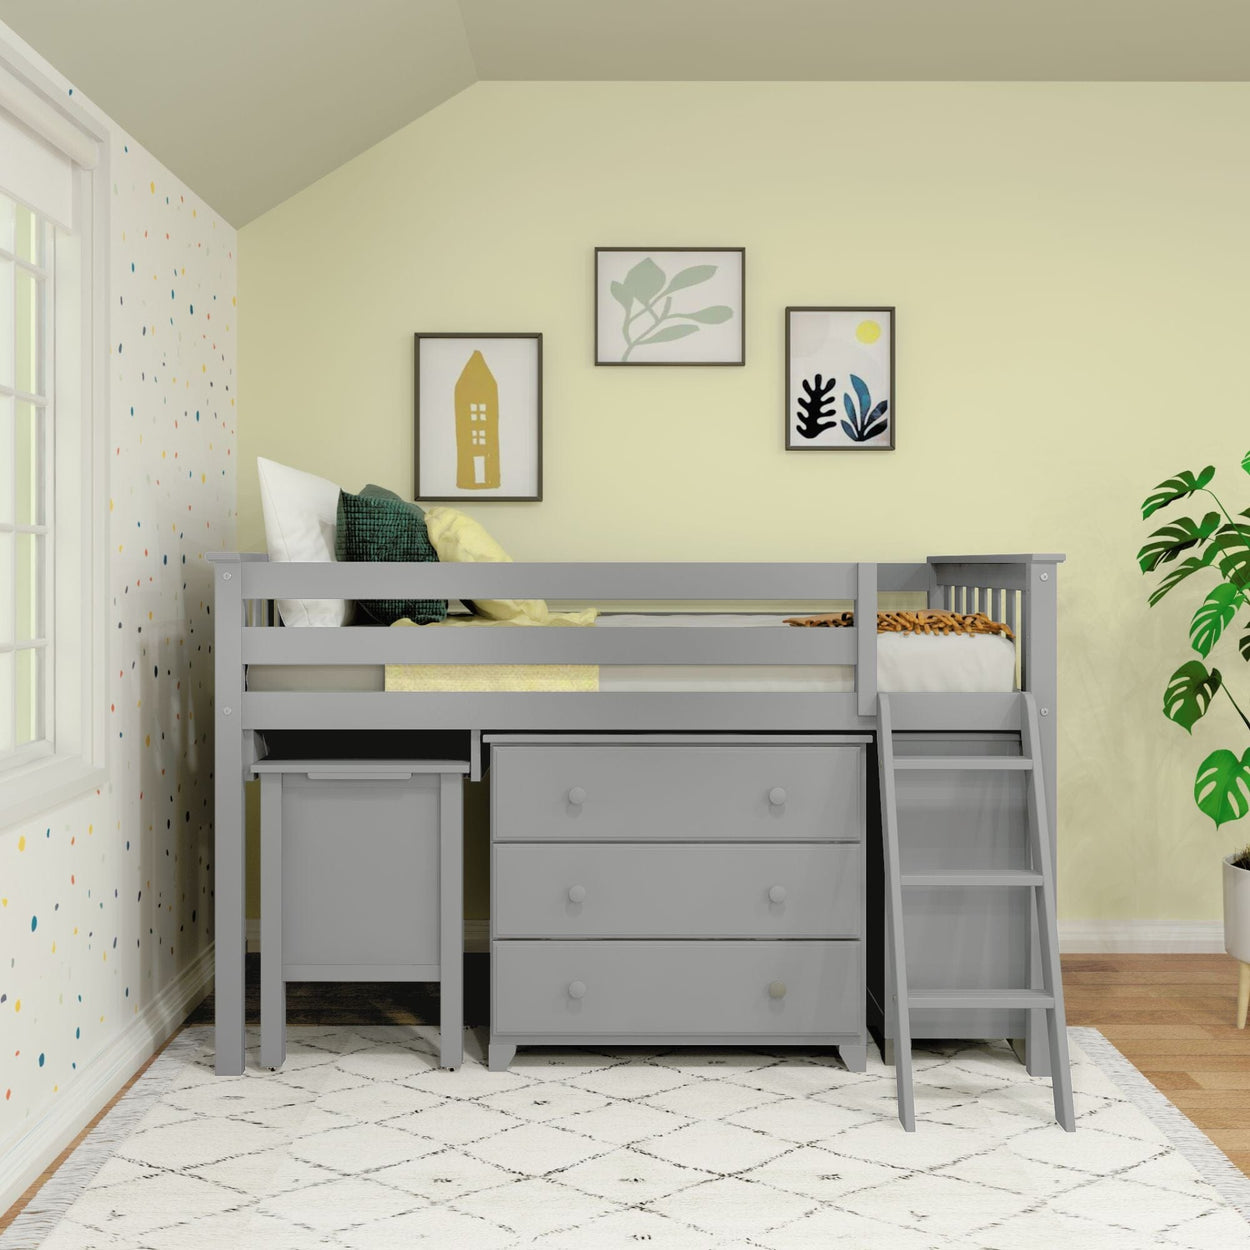 18-3D3DDK-121 : Loft Beds Twin-Size Low Loft with Pull-Out Desk and 3-Drawer Dressers, Grey